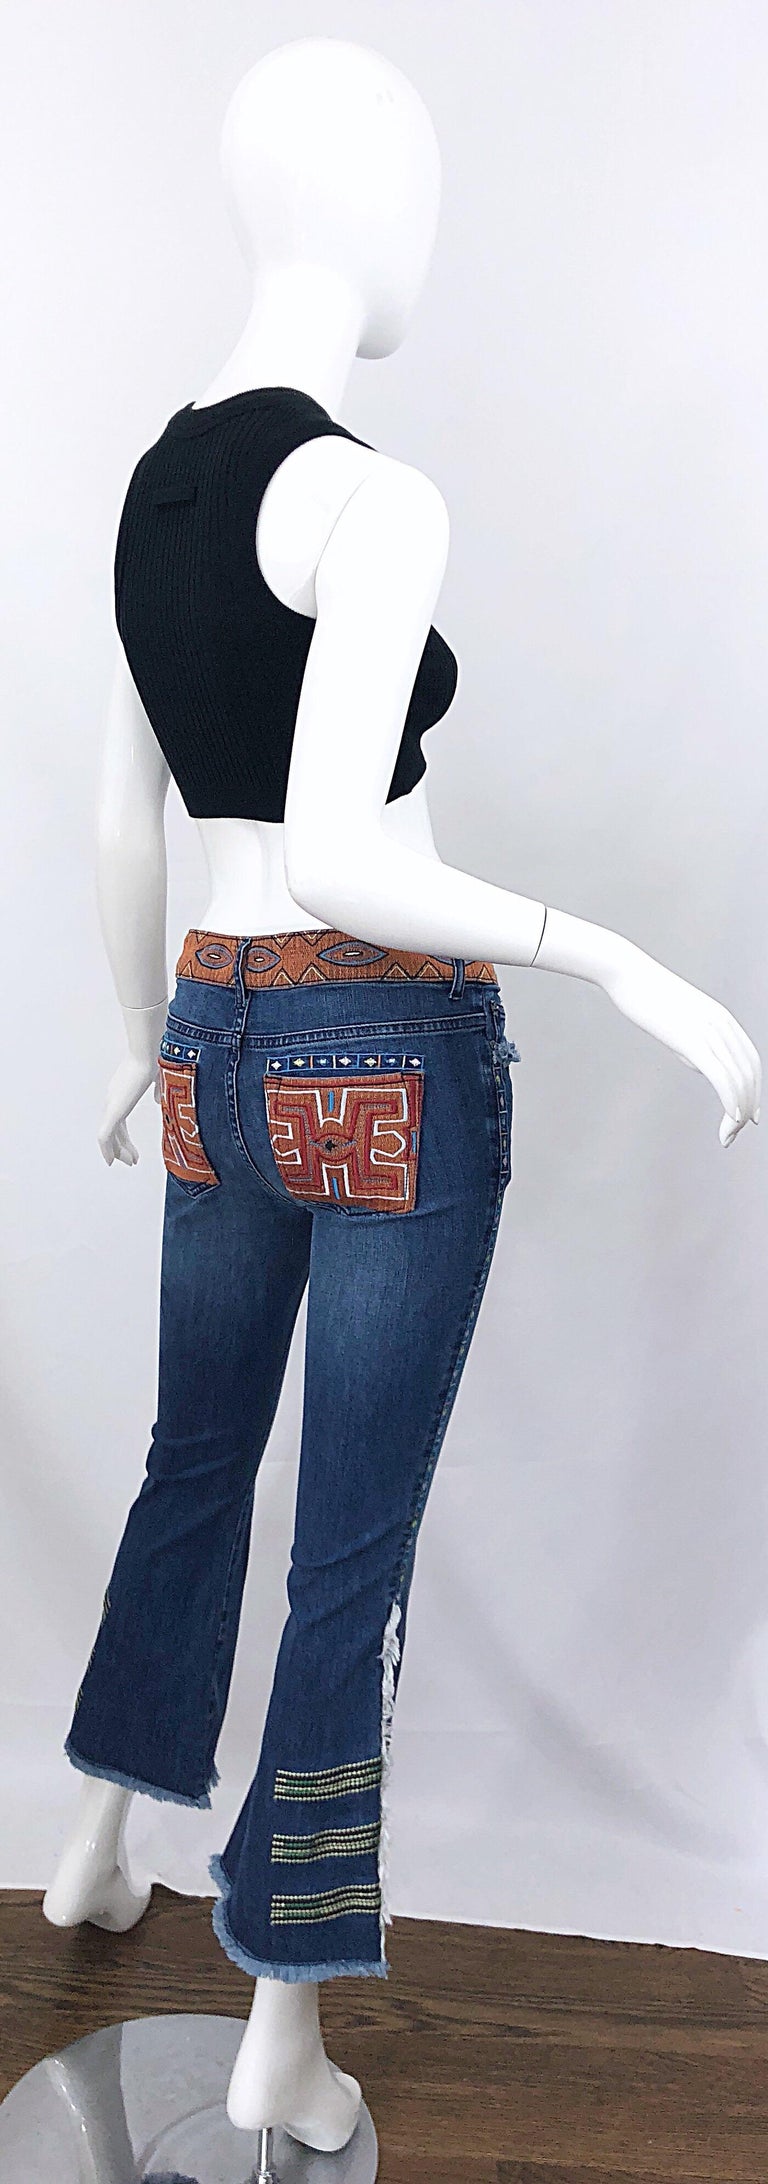 Rare NWT Early 2000s Nicole Miller Artelier Sz 26 Limited Edition Jeans ...